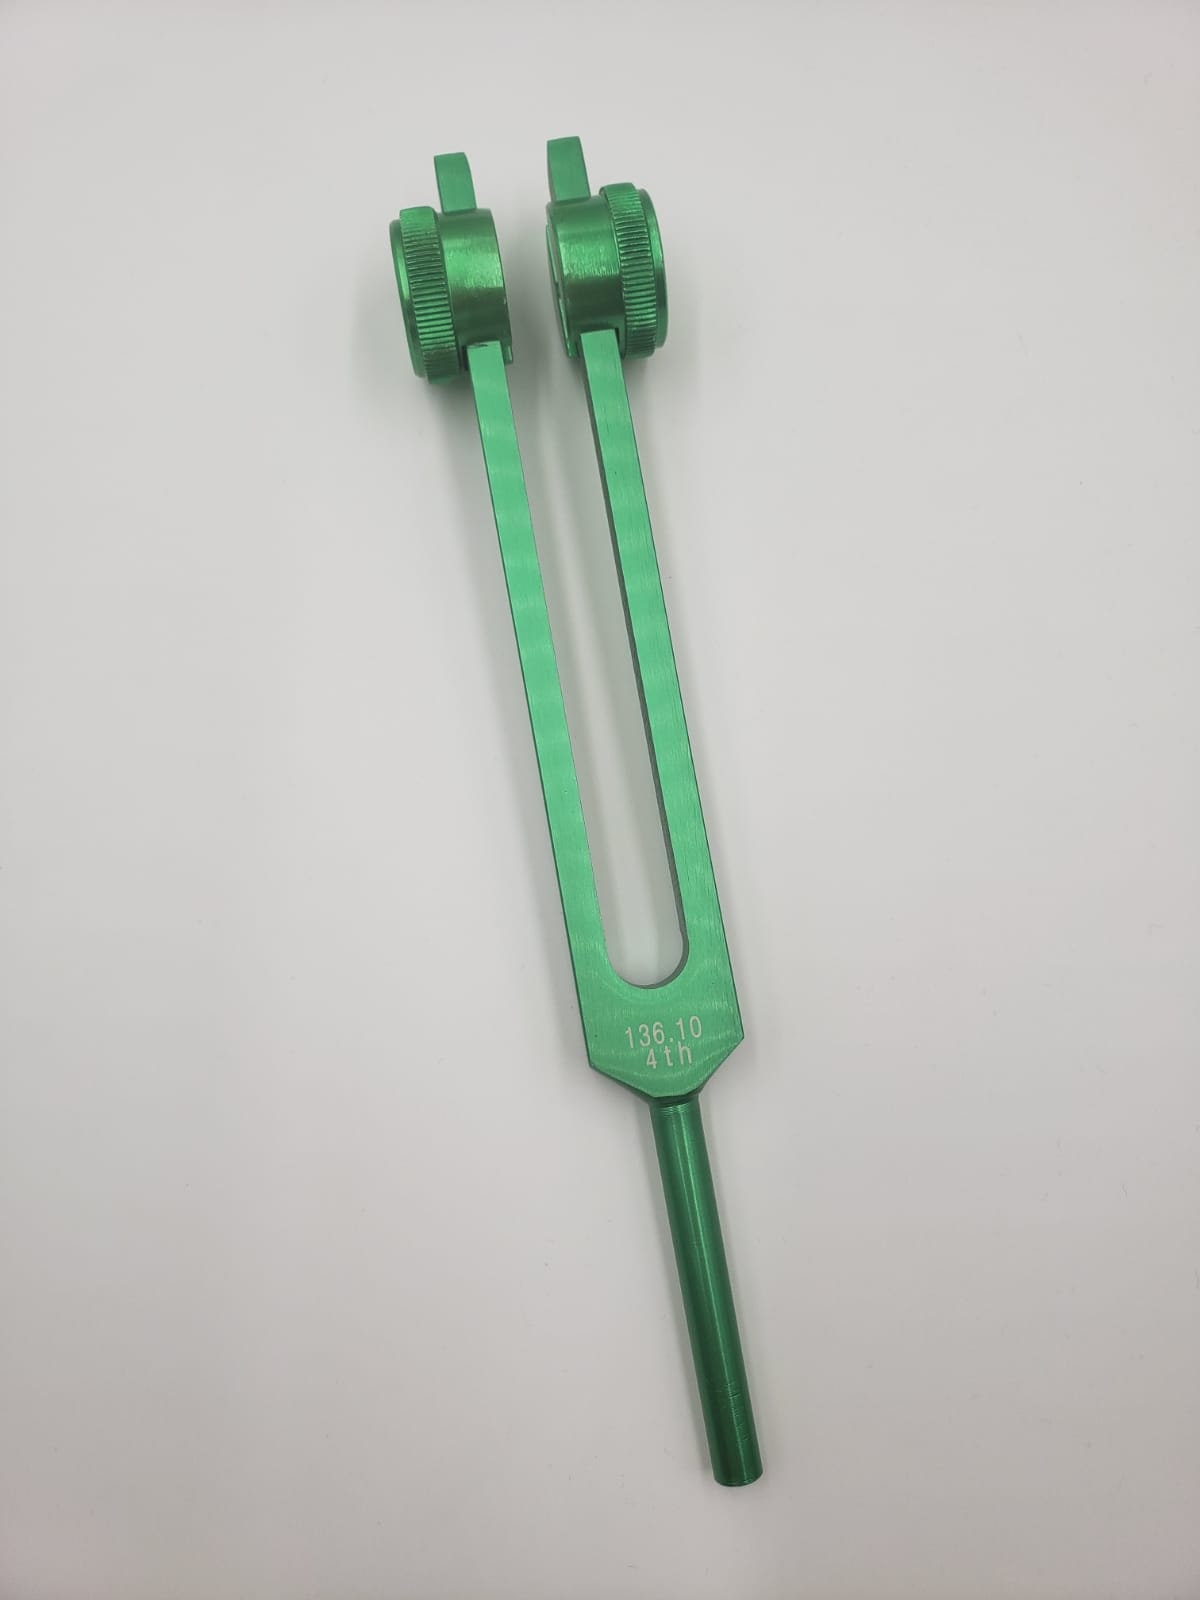 136.1Hz Om GREEN Chakra Tuning Fork with Bag / Pouch and Mallet - soundhealers